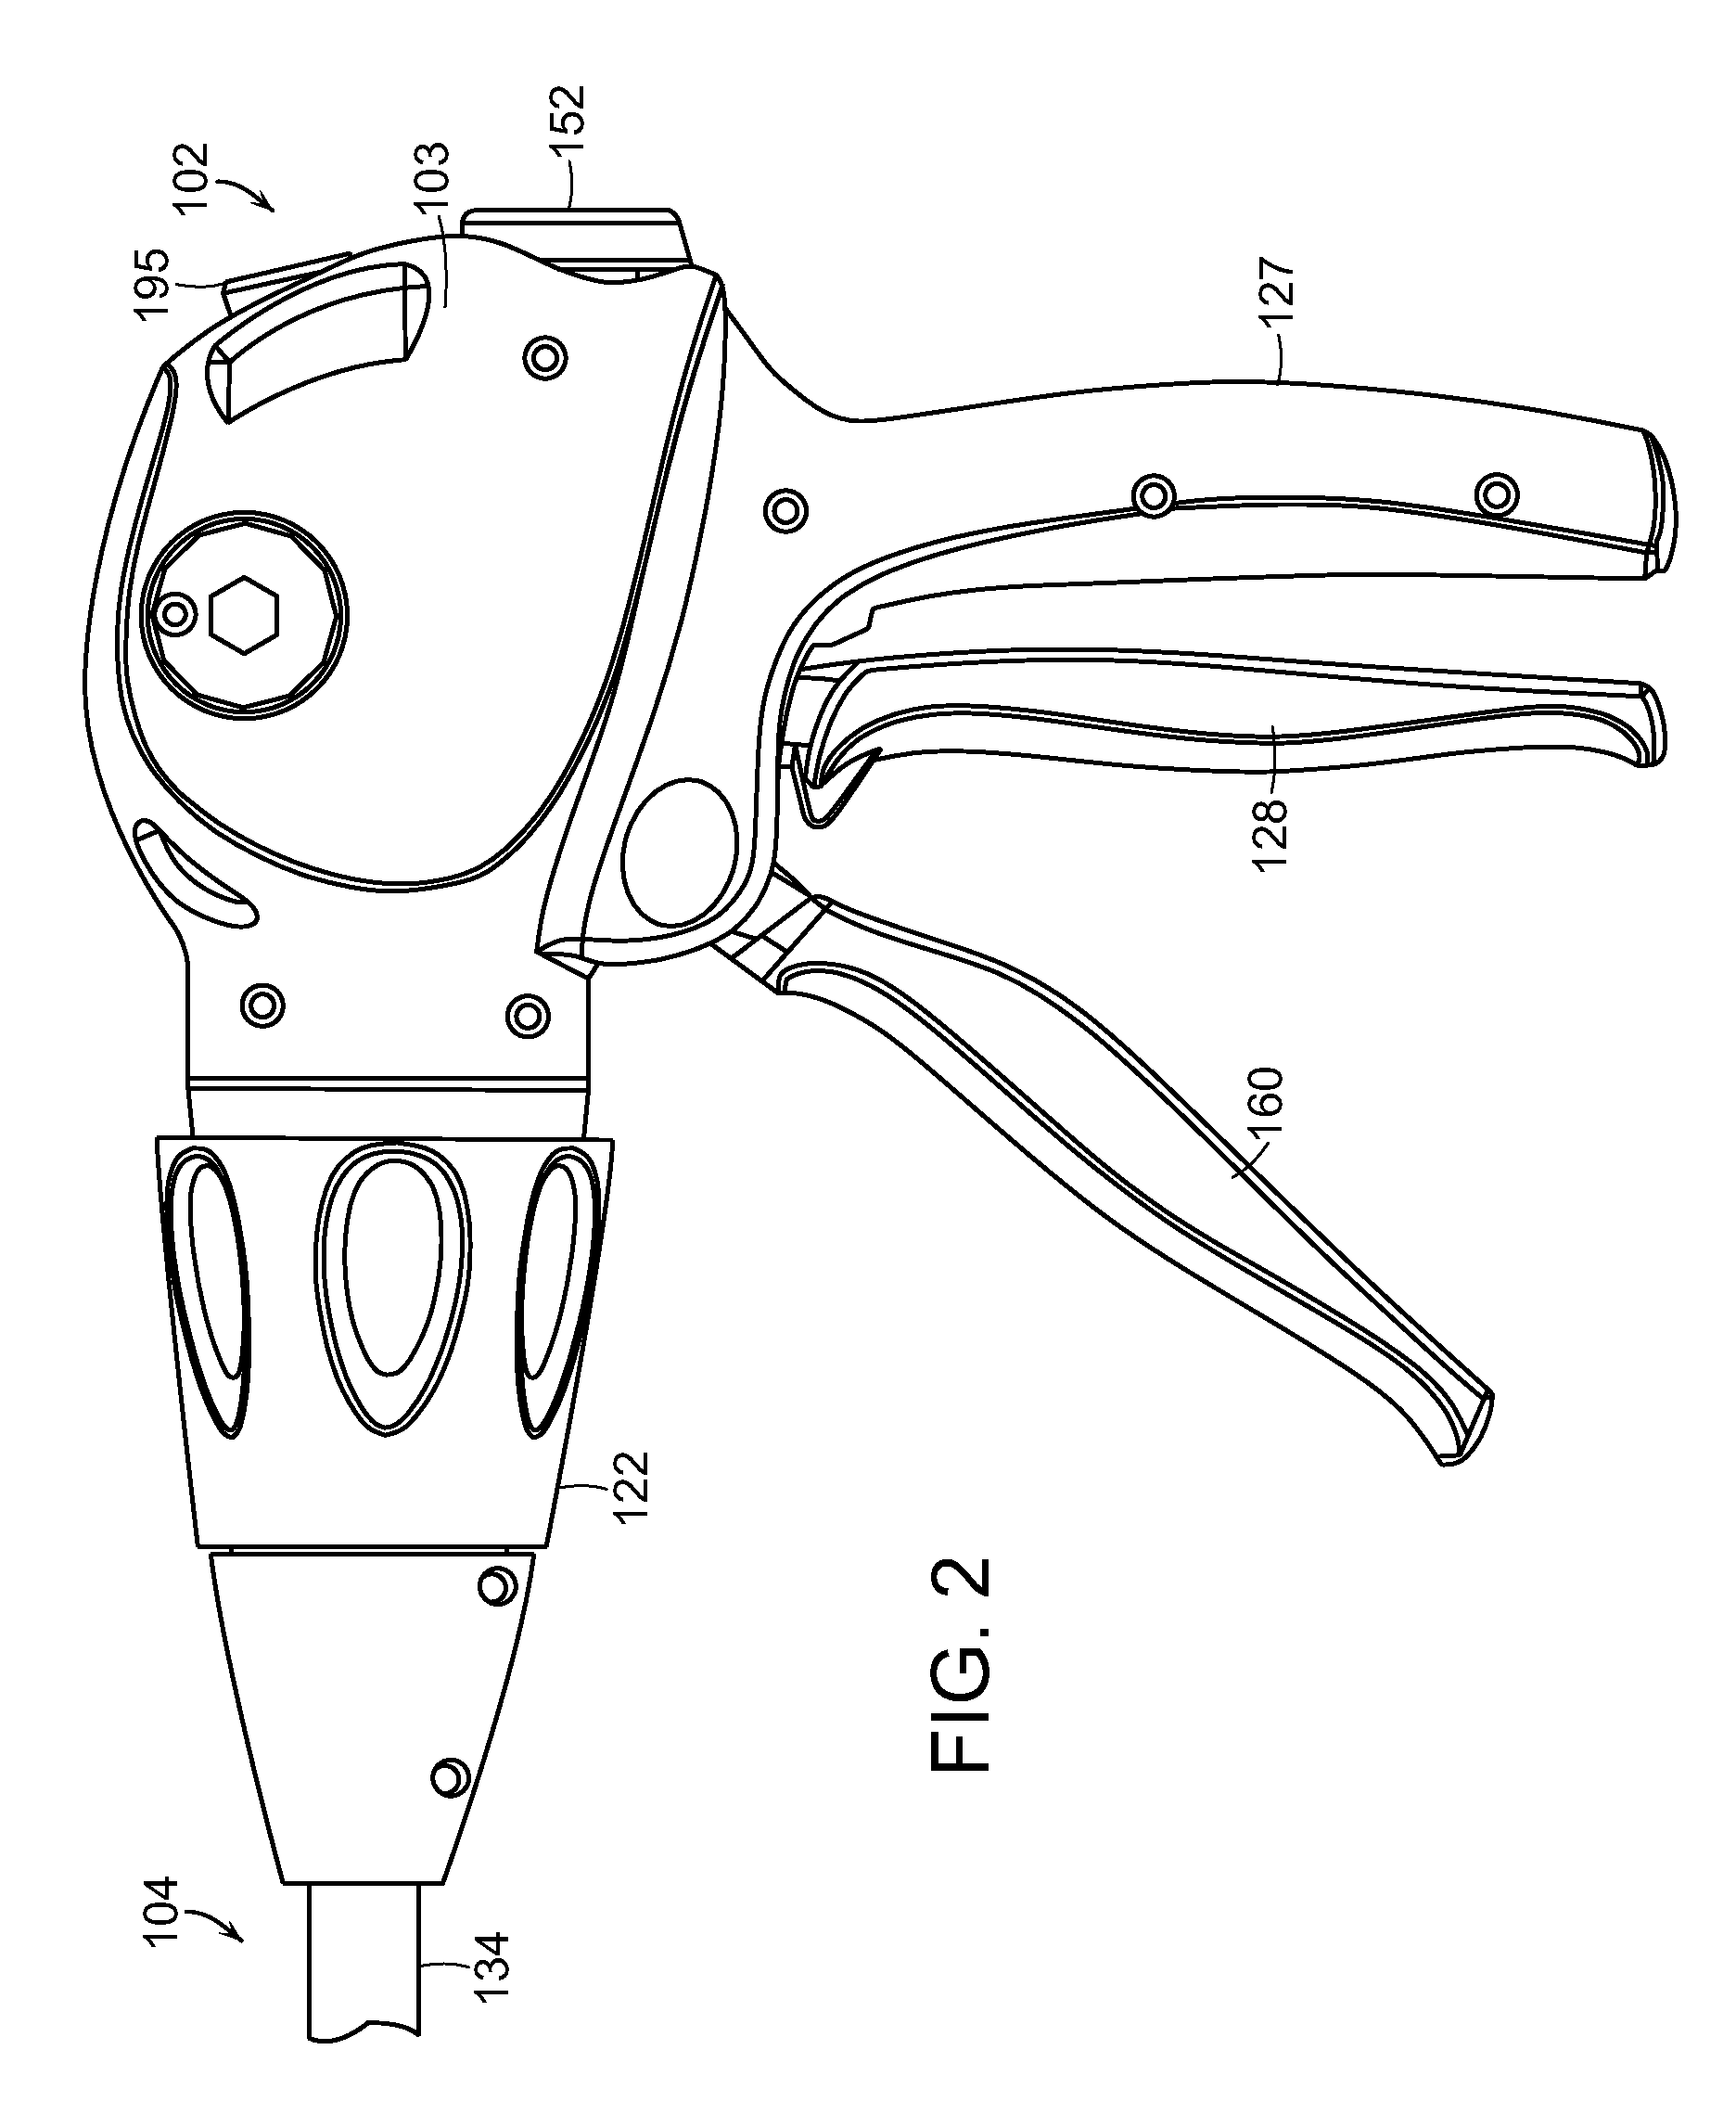 Surgical Stapling Instrument With A Geared Return Mechanism